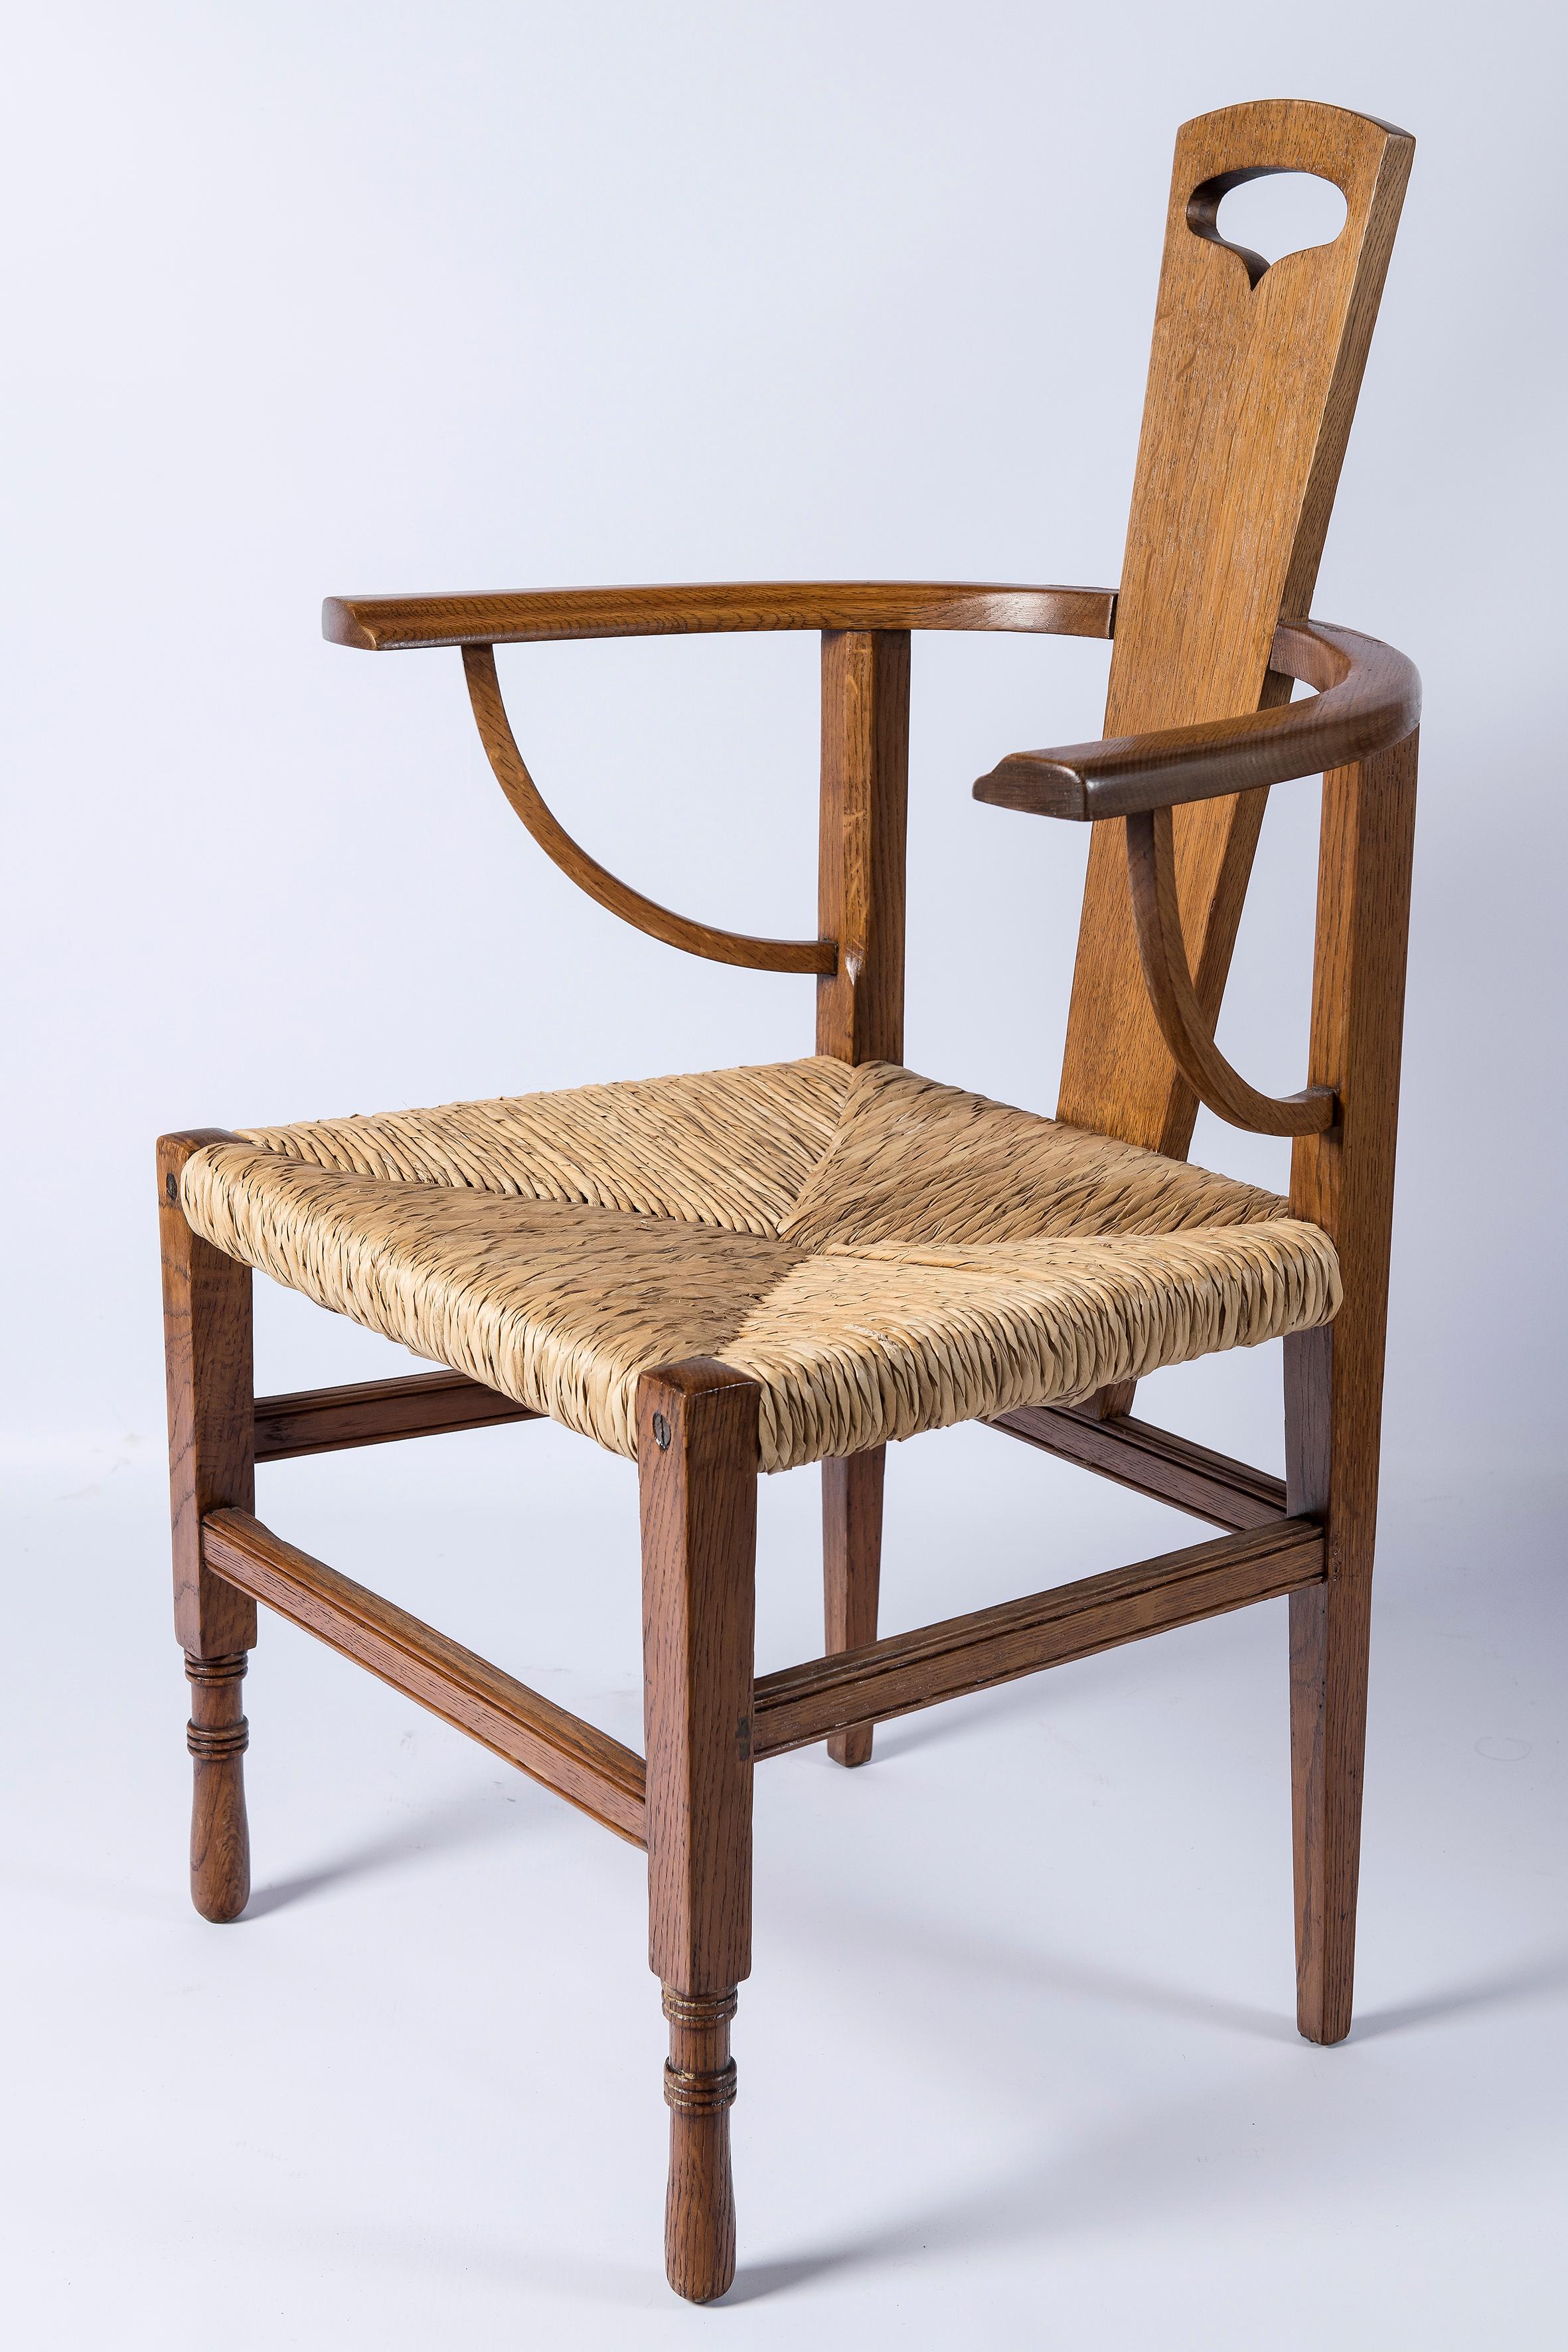 Scottish Pair of Oak Wood Armchairs, Attributed to George Walton, Scotland, circa 1890 For Sale